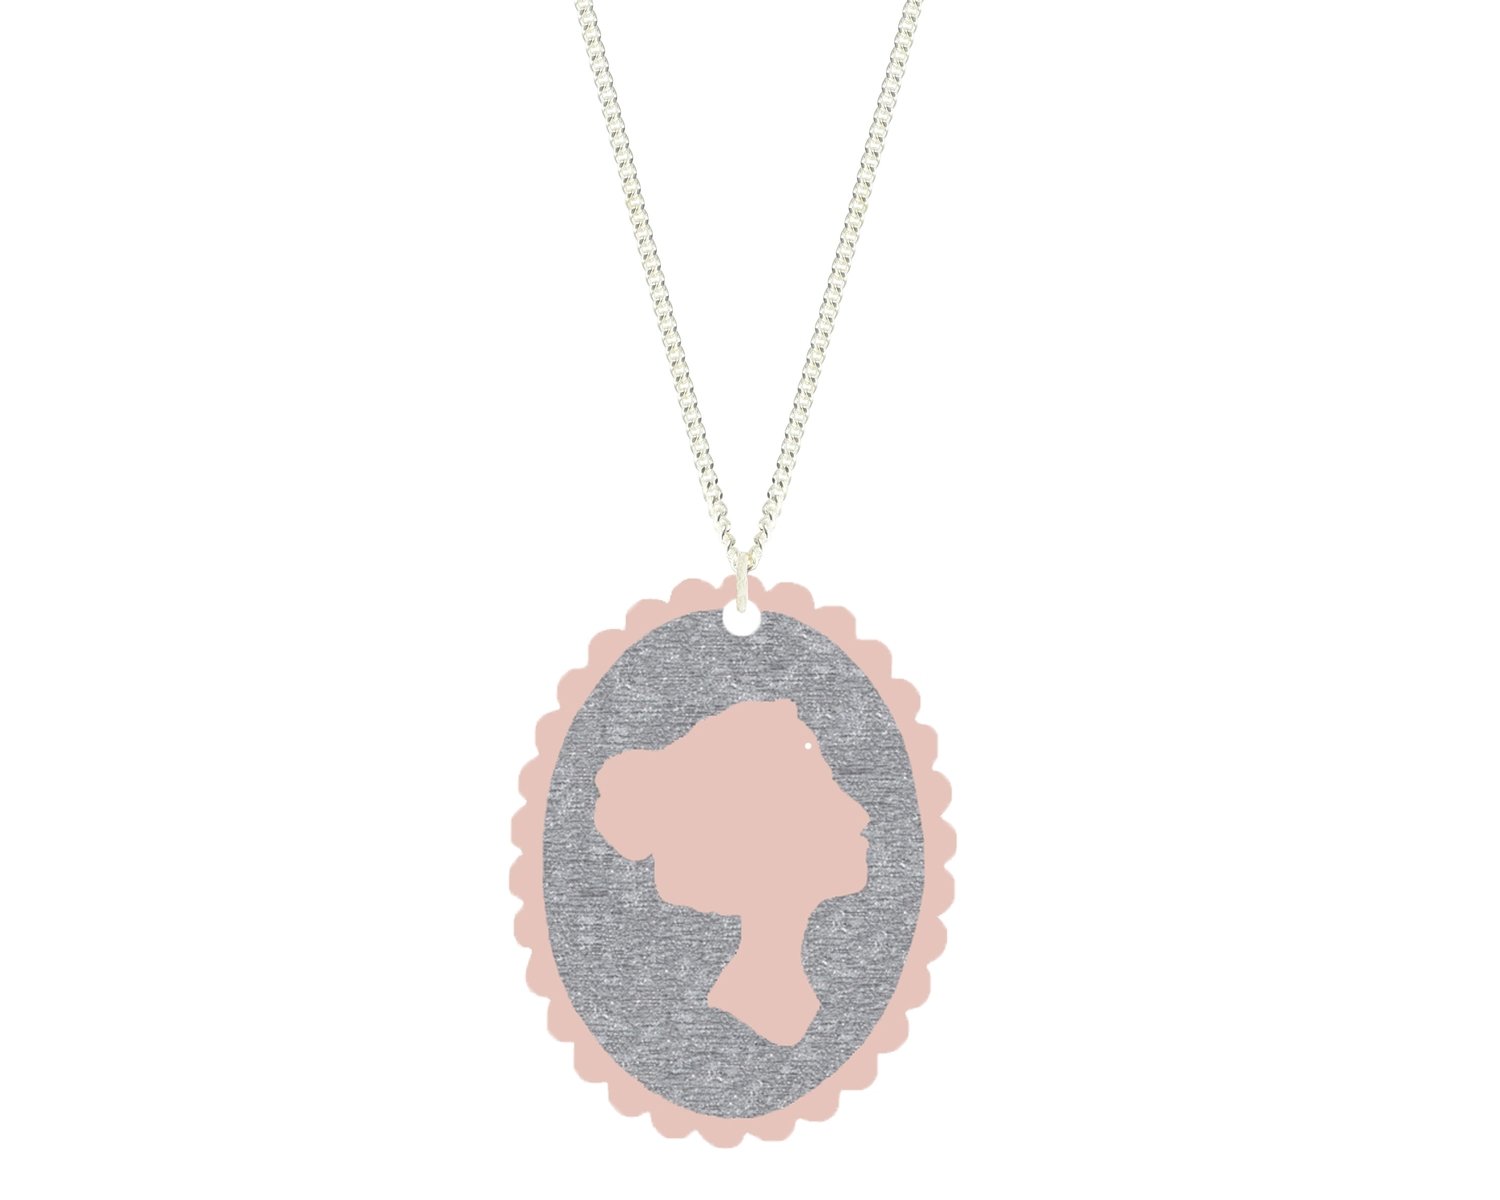 Cameo Head Pendant Carved Style Refined with Paint on Chain Necklace